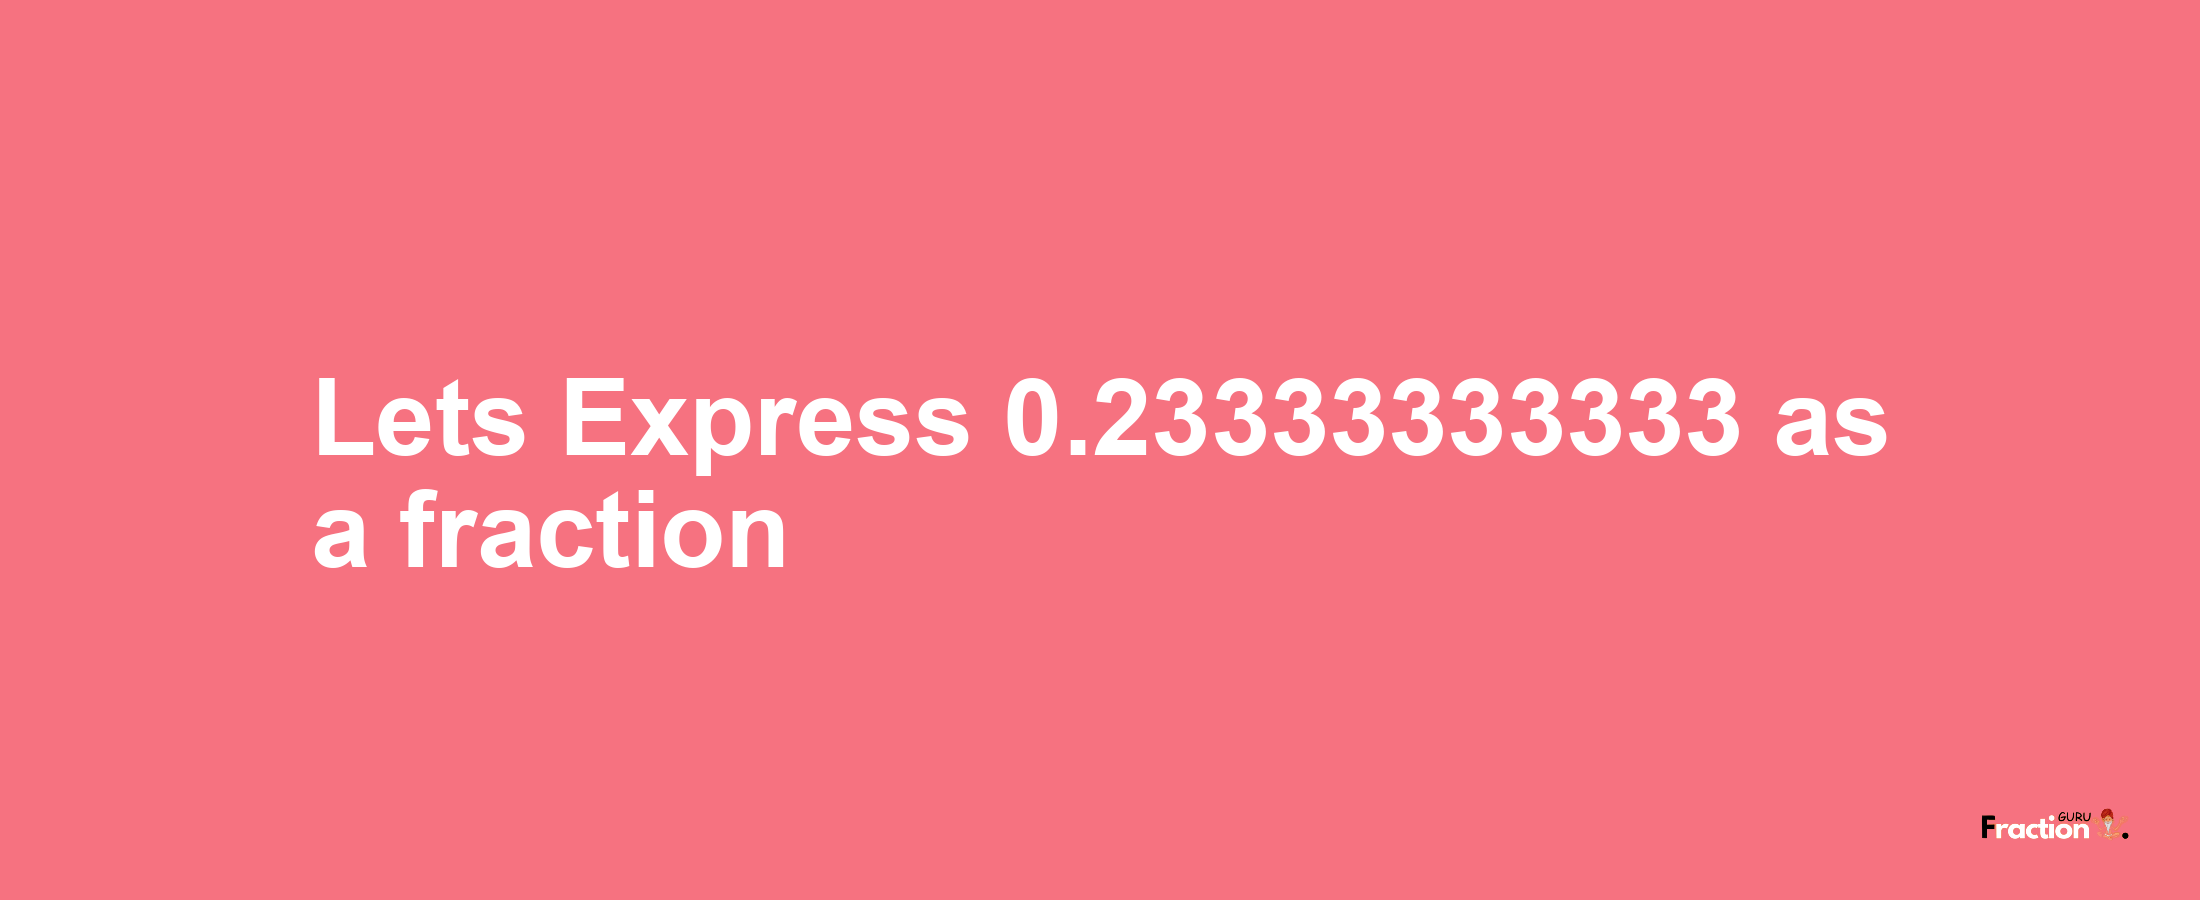 Lets Express 0.23333333333 as afraction